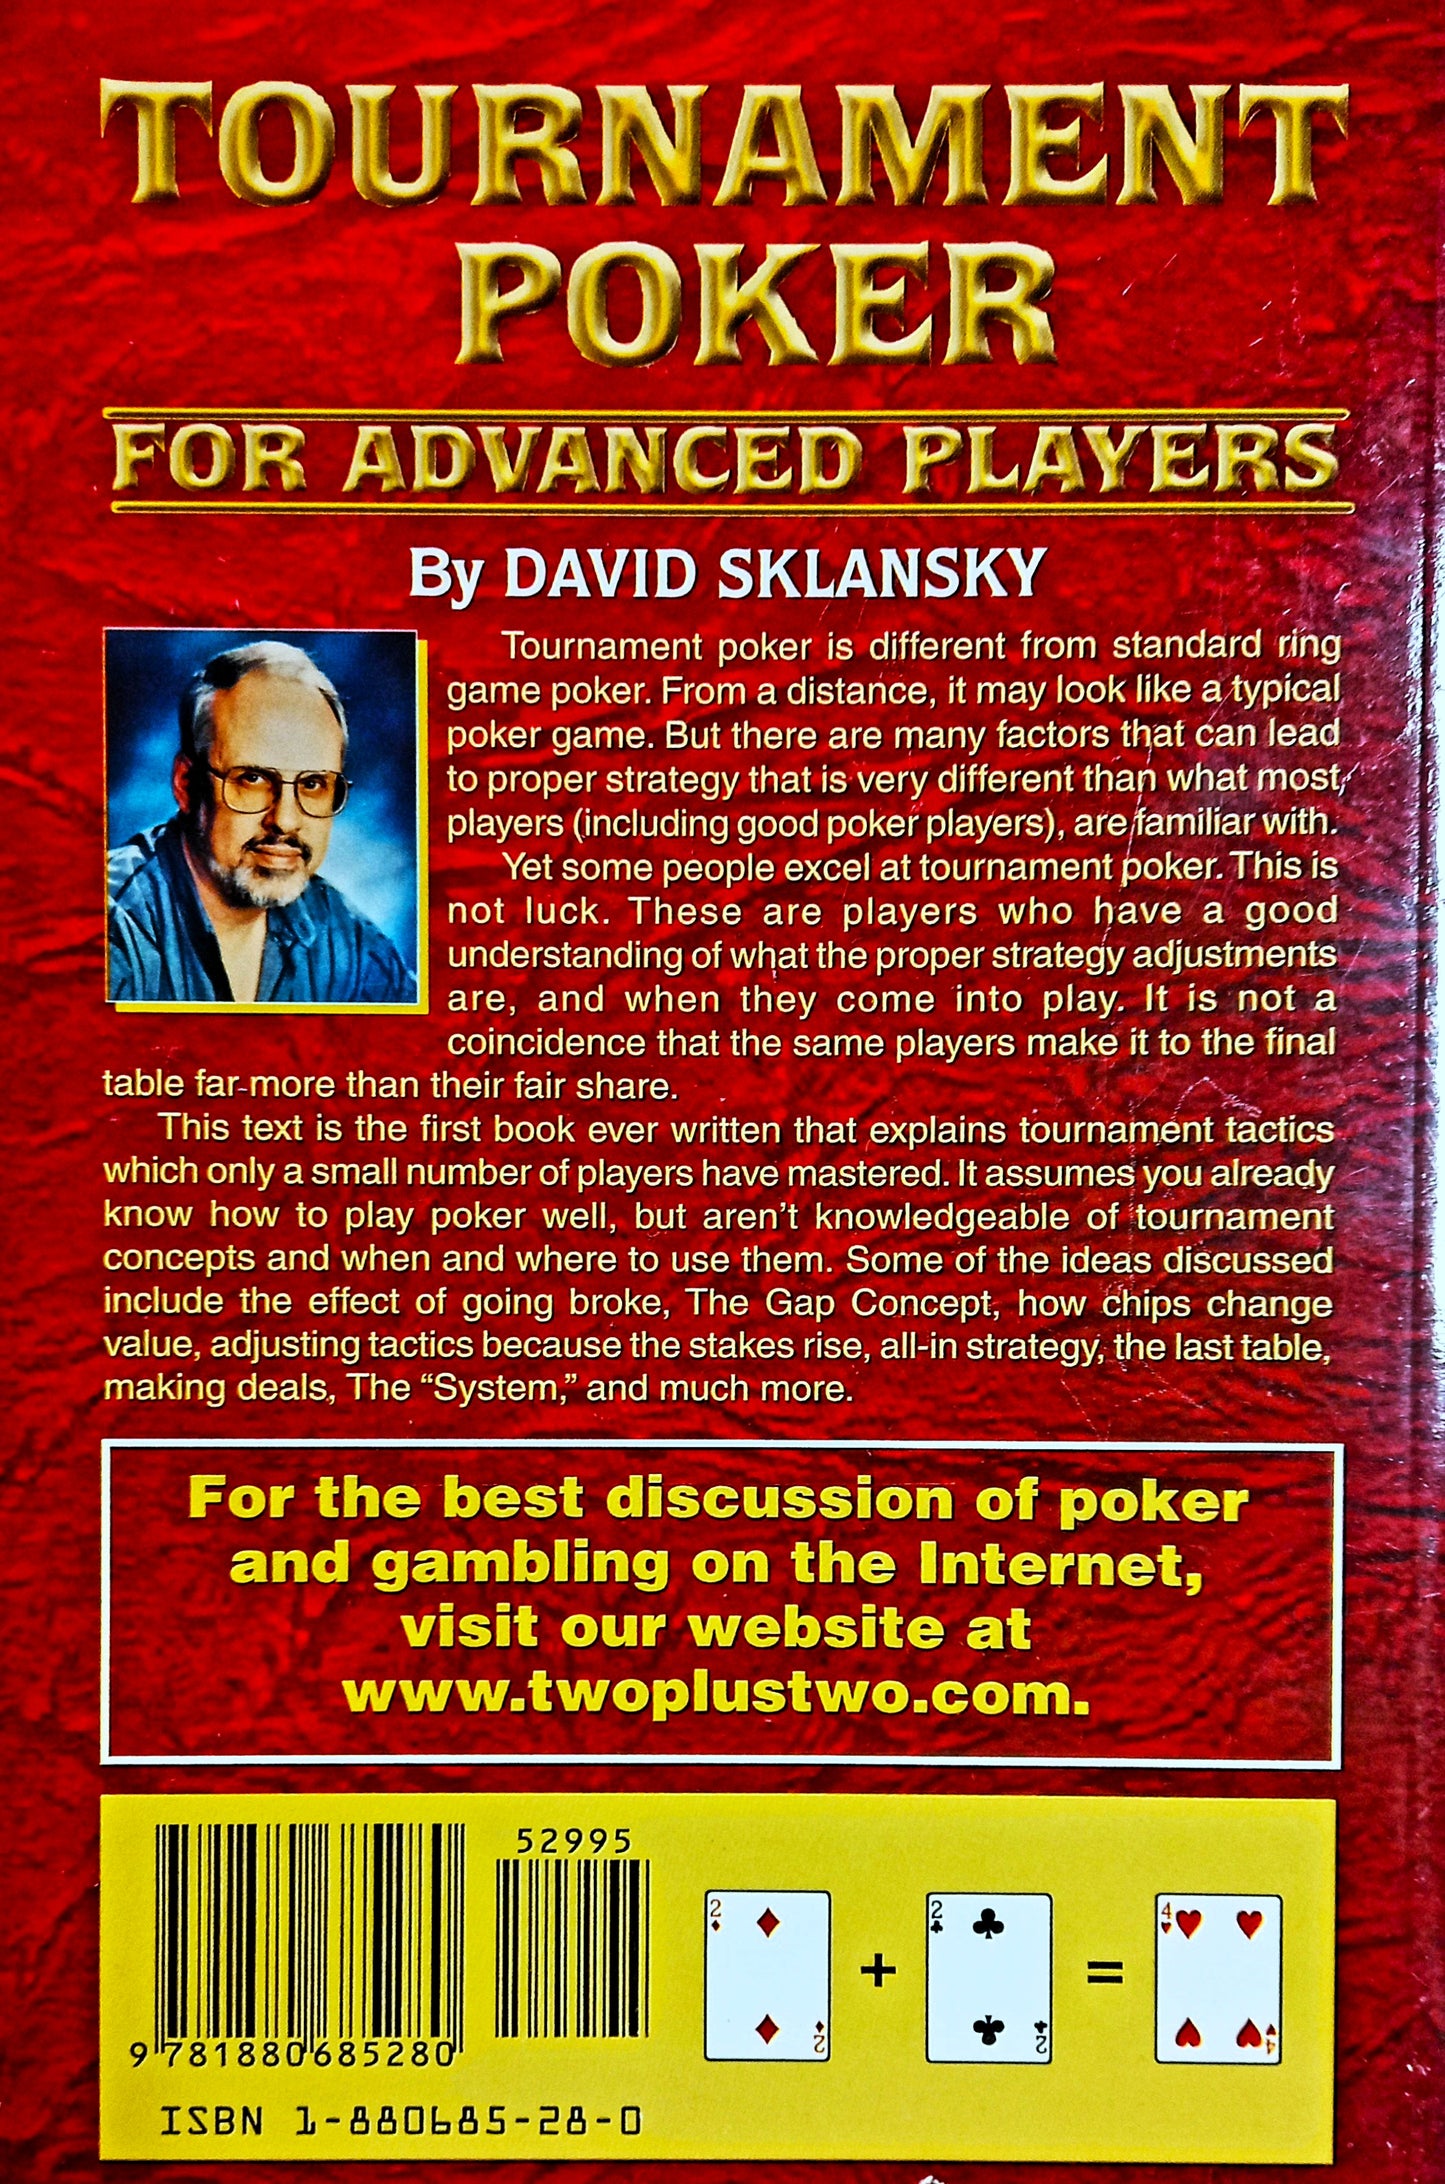 Tournament Poker for Advanced Players